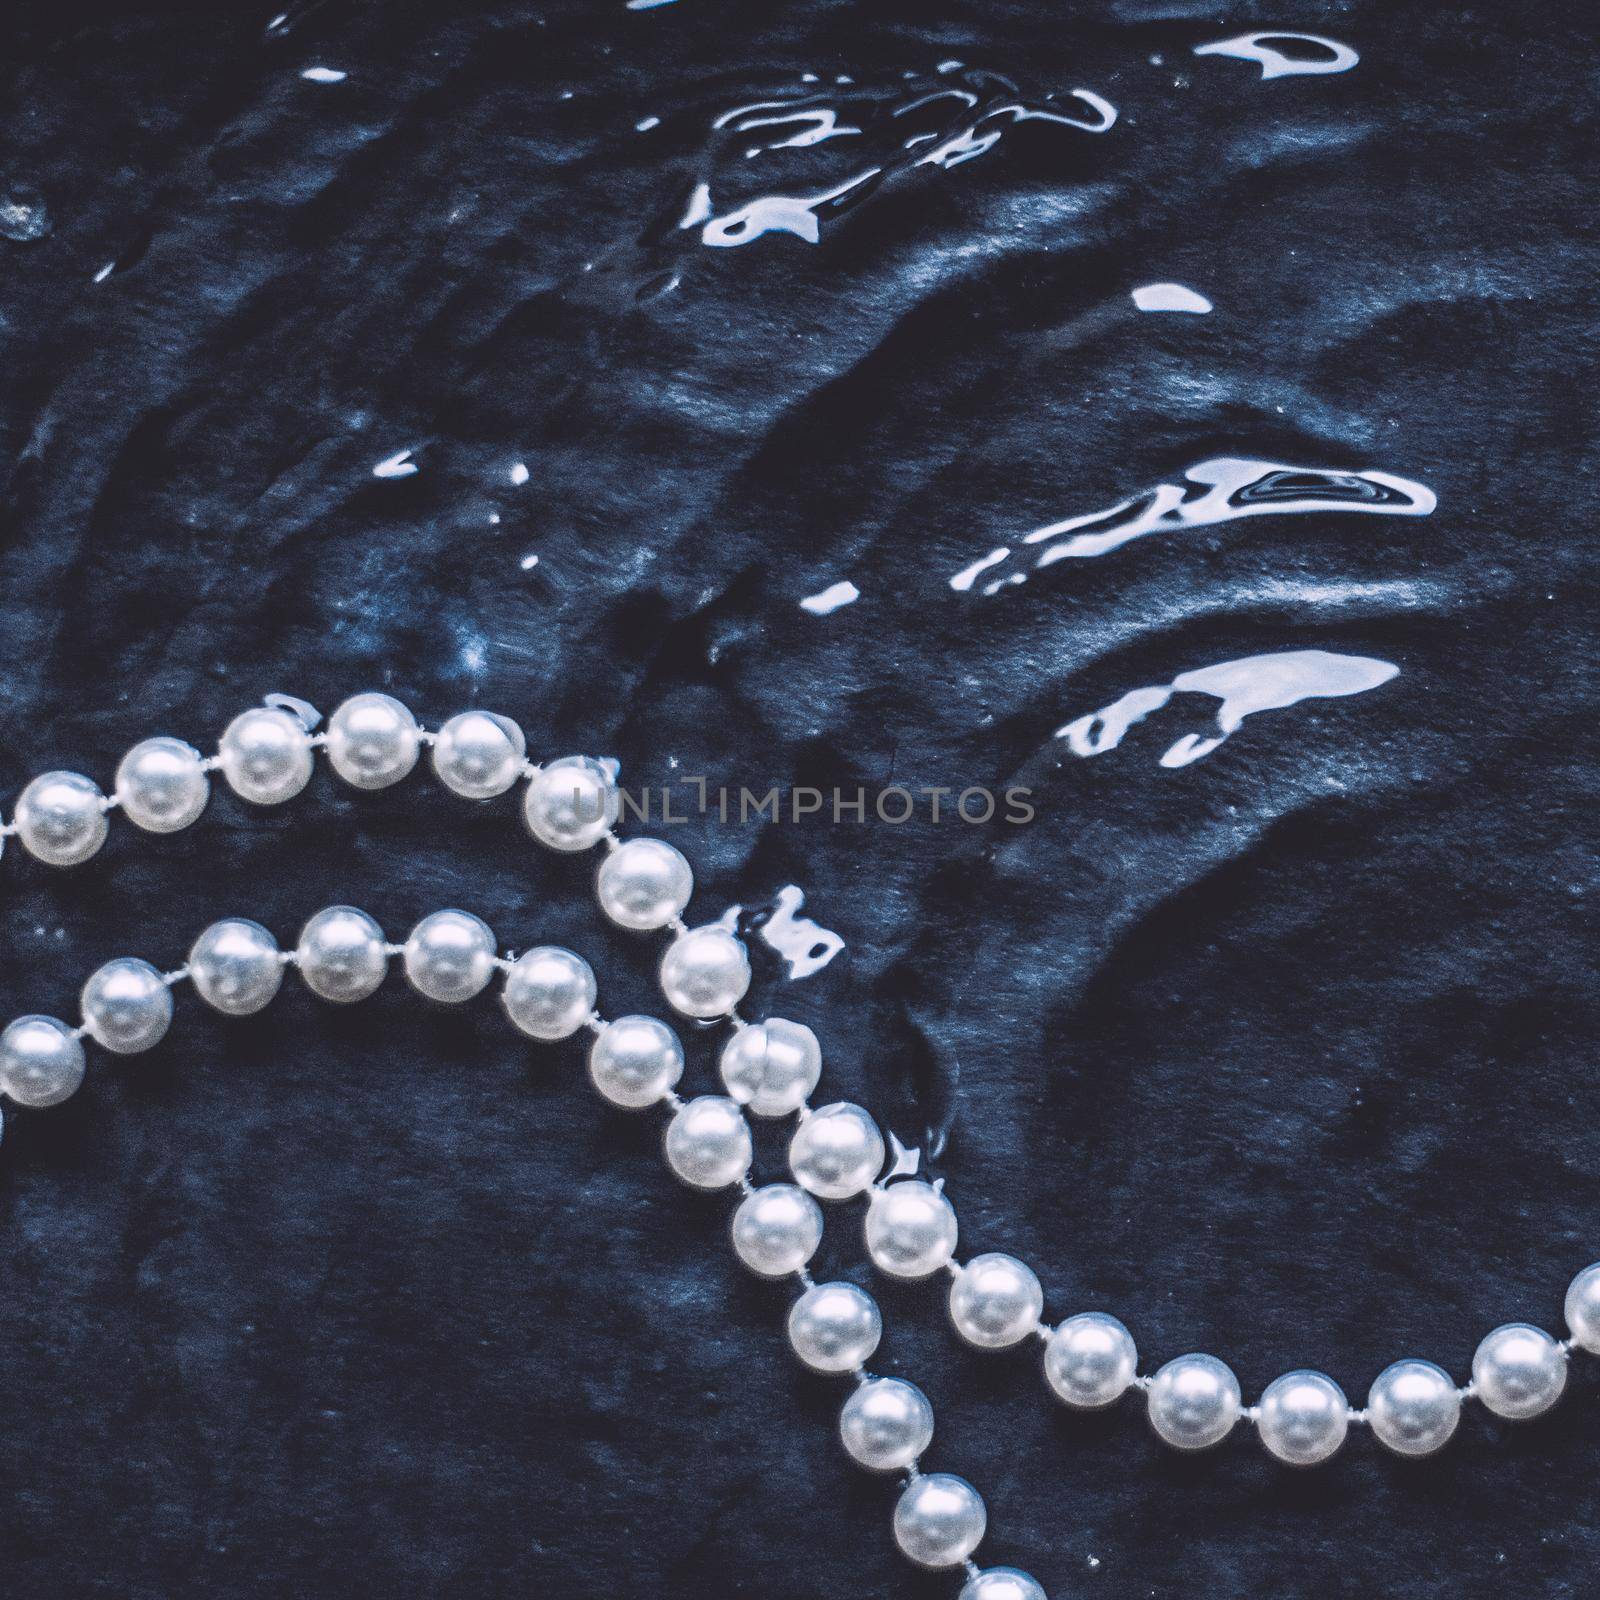 jewelry and luxury gift for her styled concept - wonderful pearl jewellery, elegant visuals